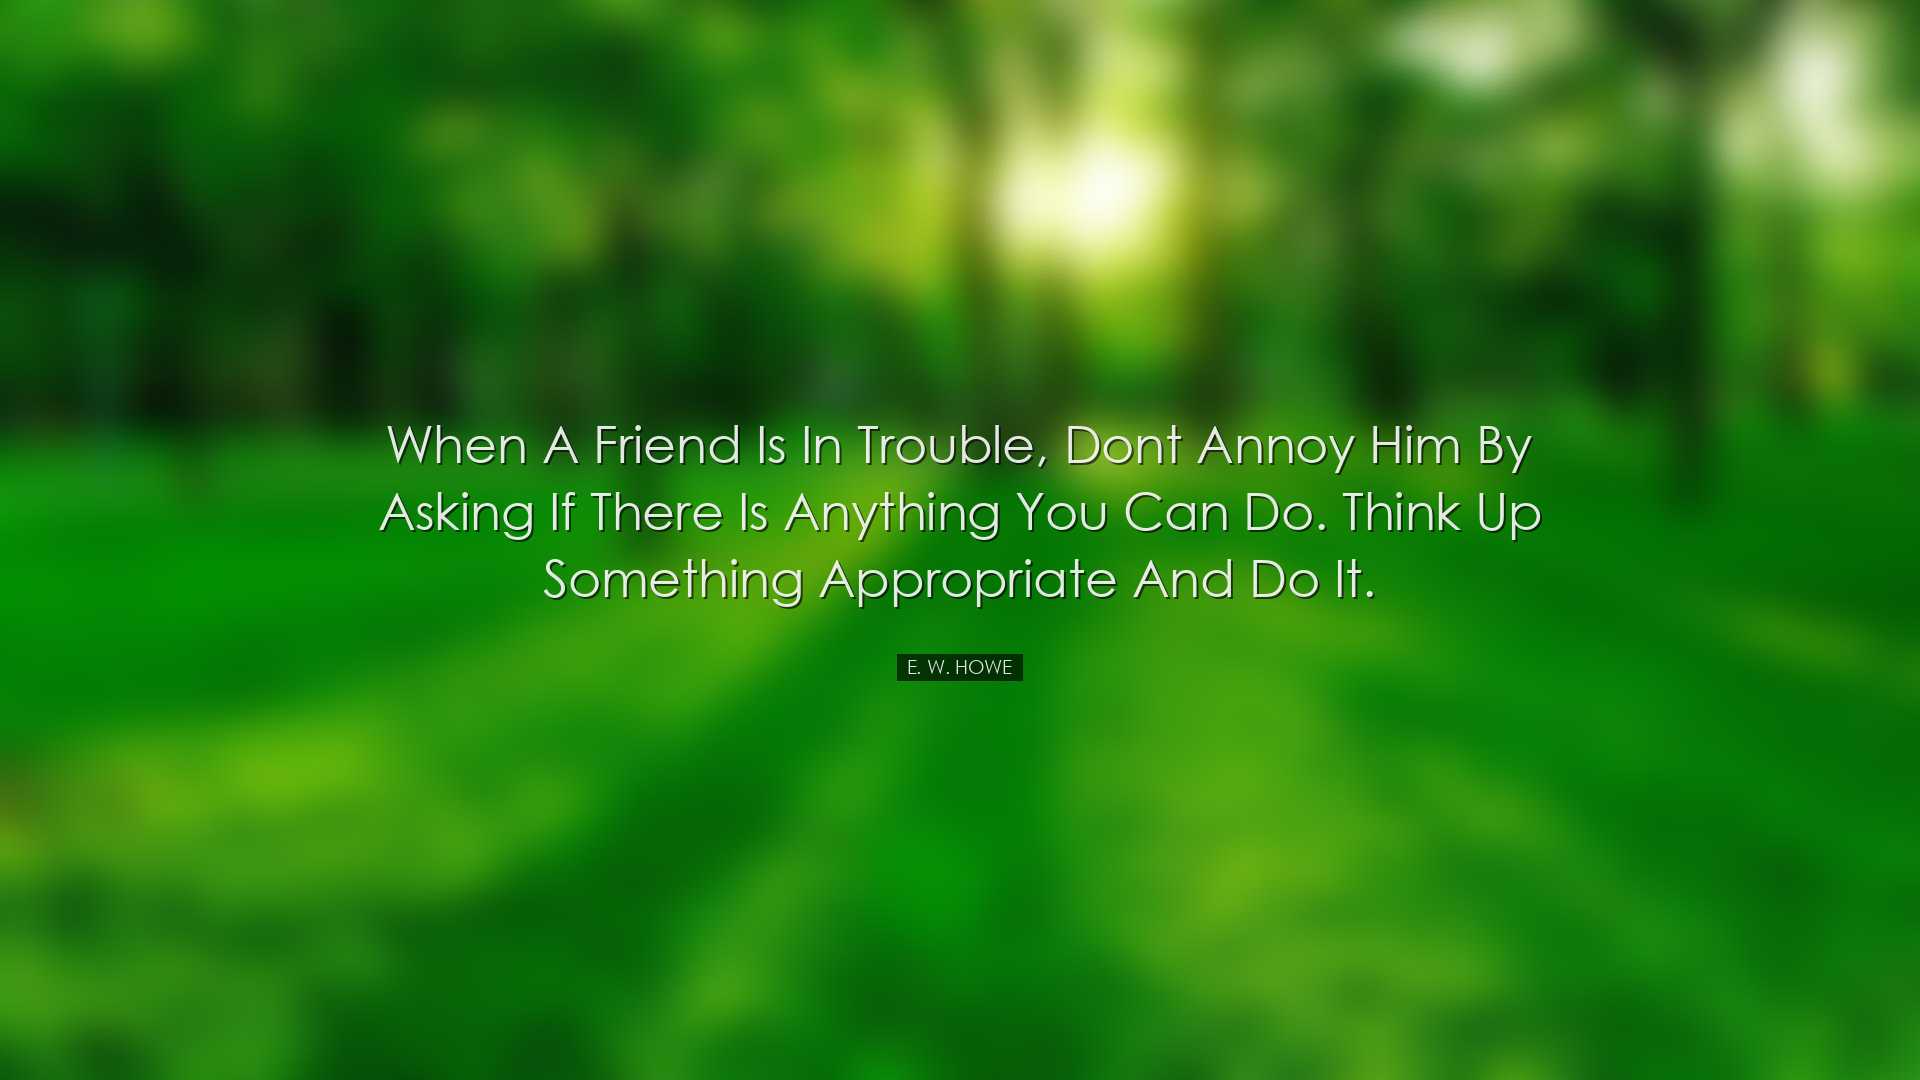 When a friend is in trouble, dont annoy him by asking if there is